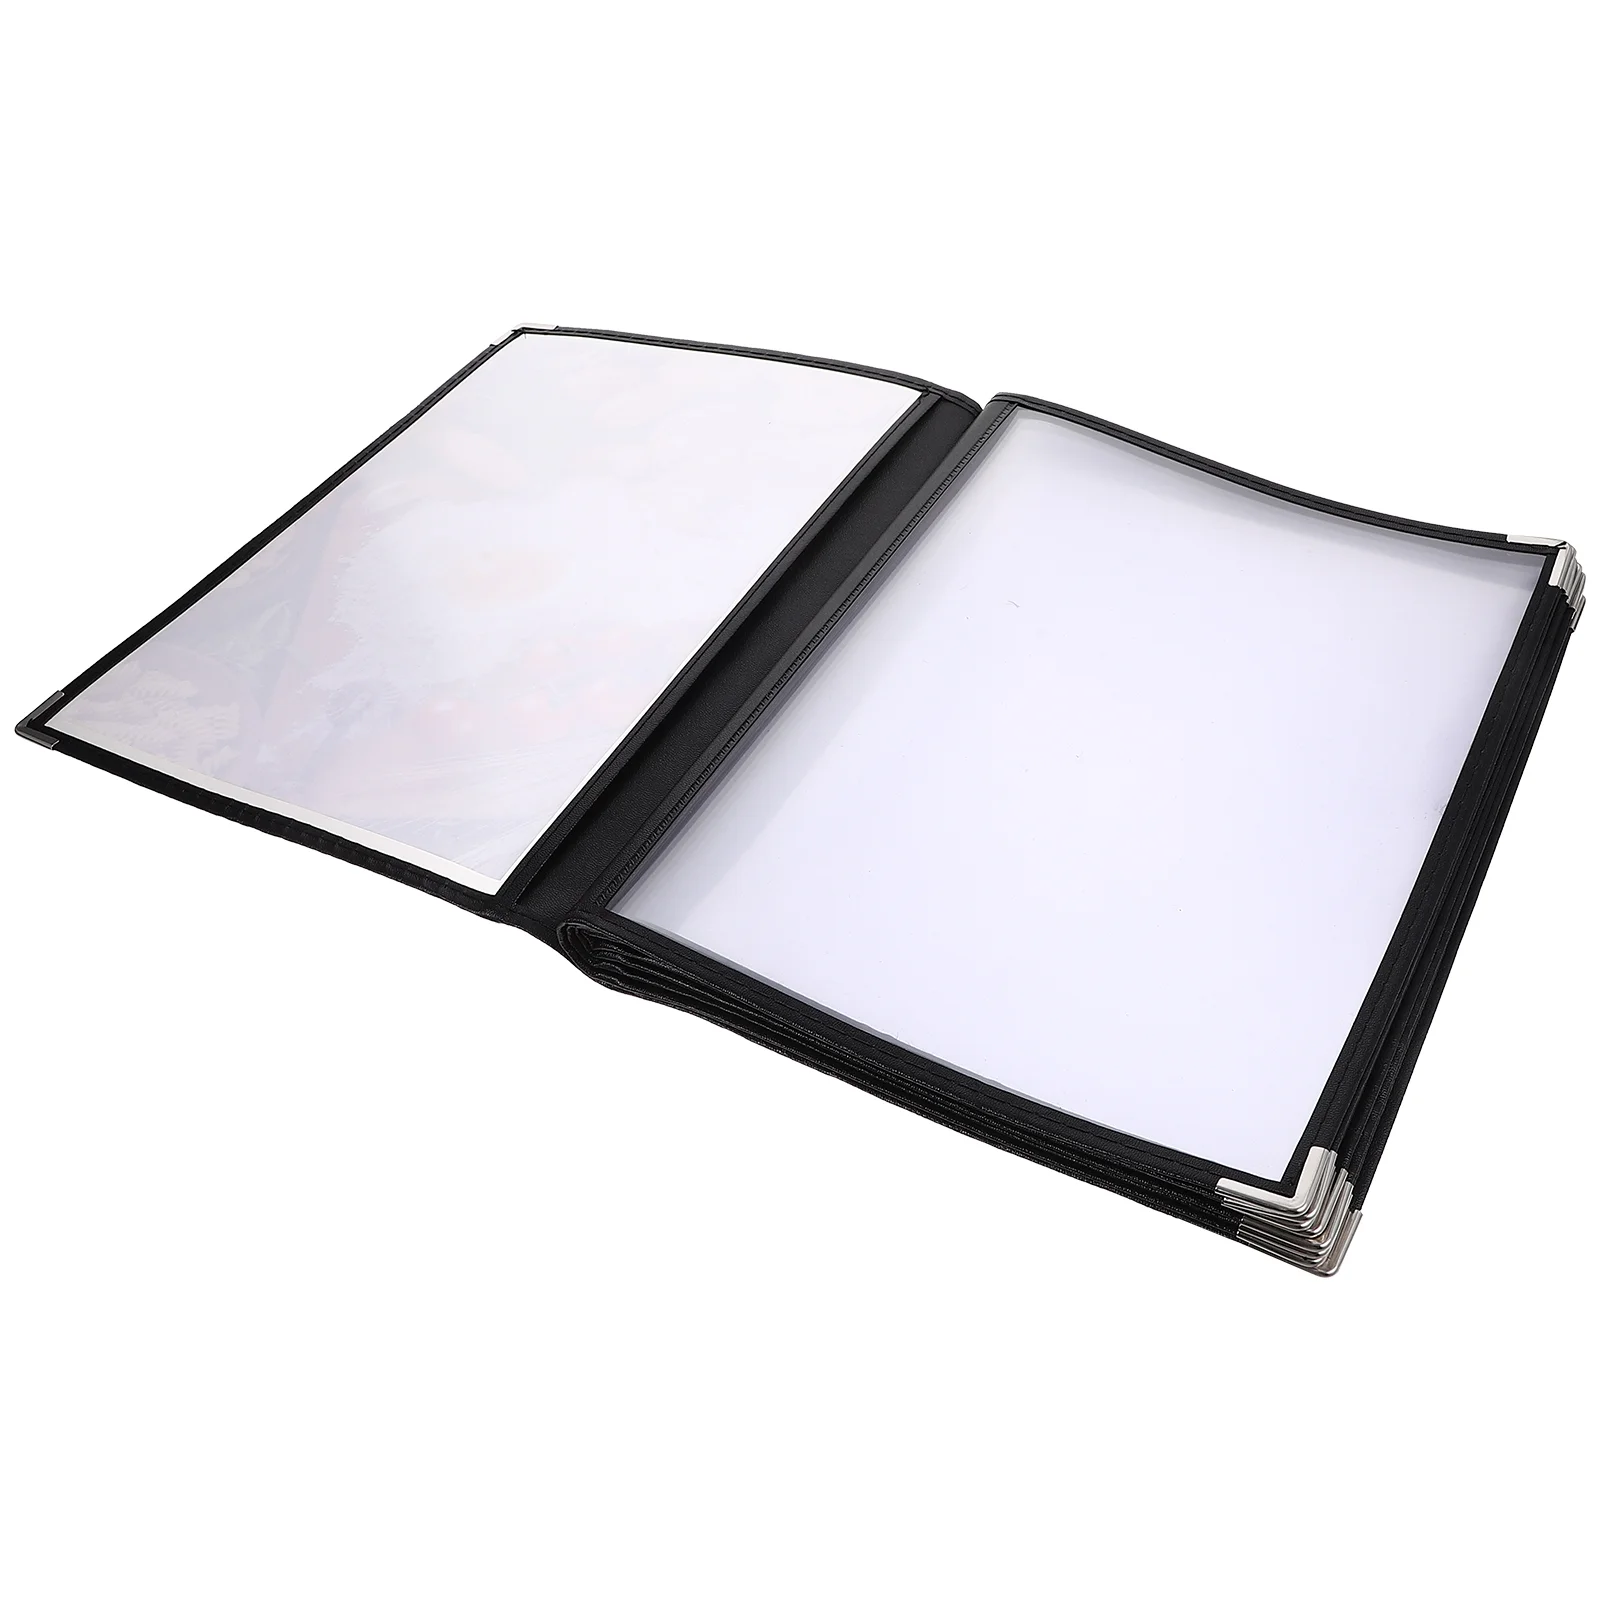 

Clear Menu Book Meal Price Holder Folder Restaurant DIY Cover Order Display Pad Compact Simple The